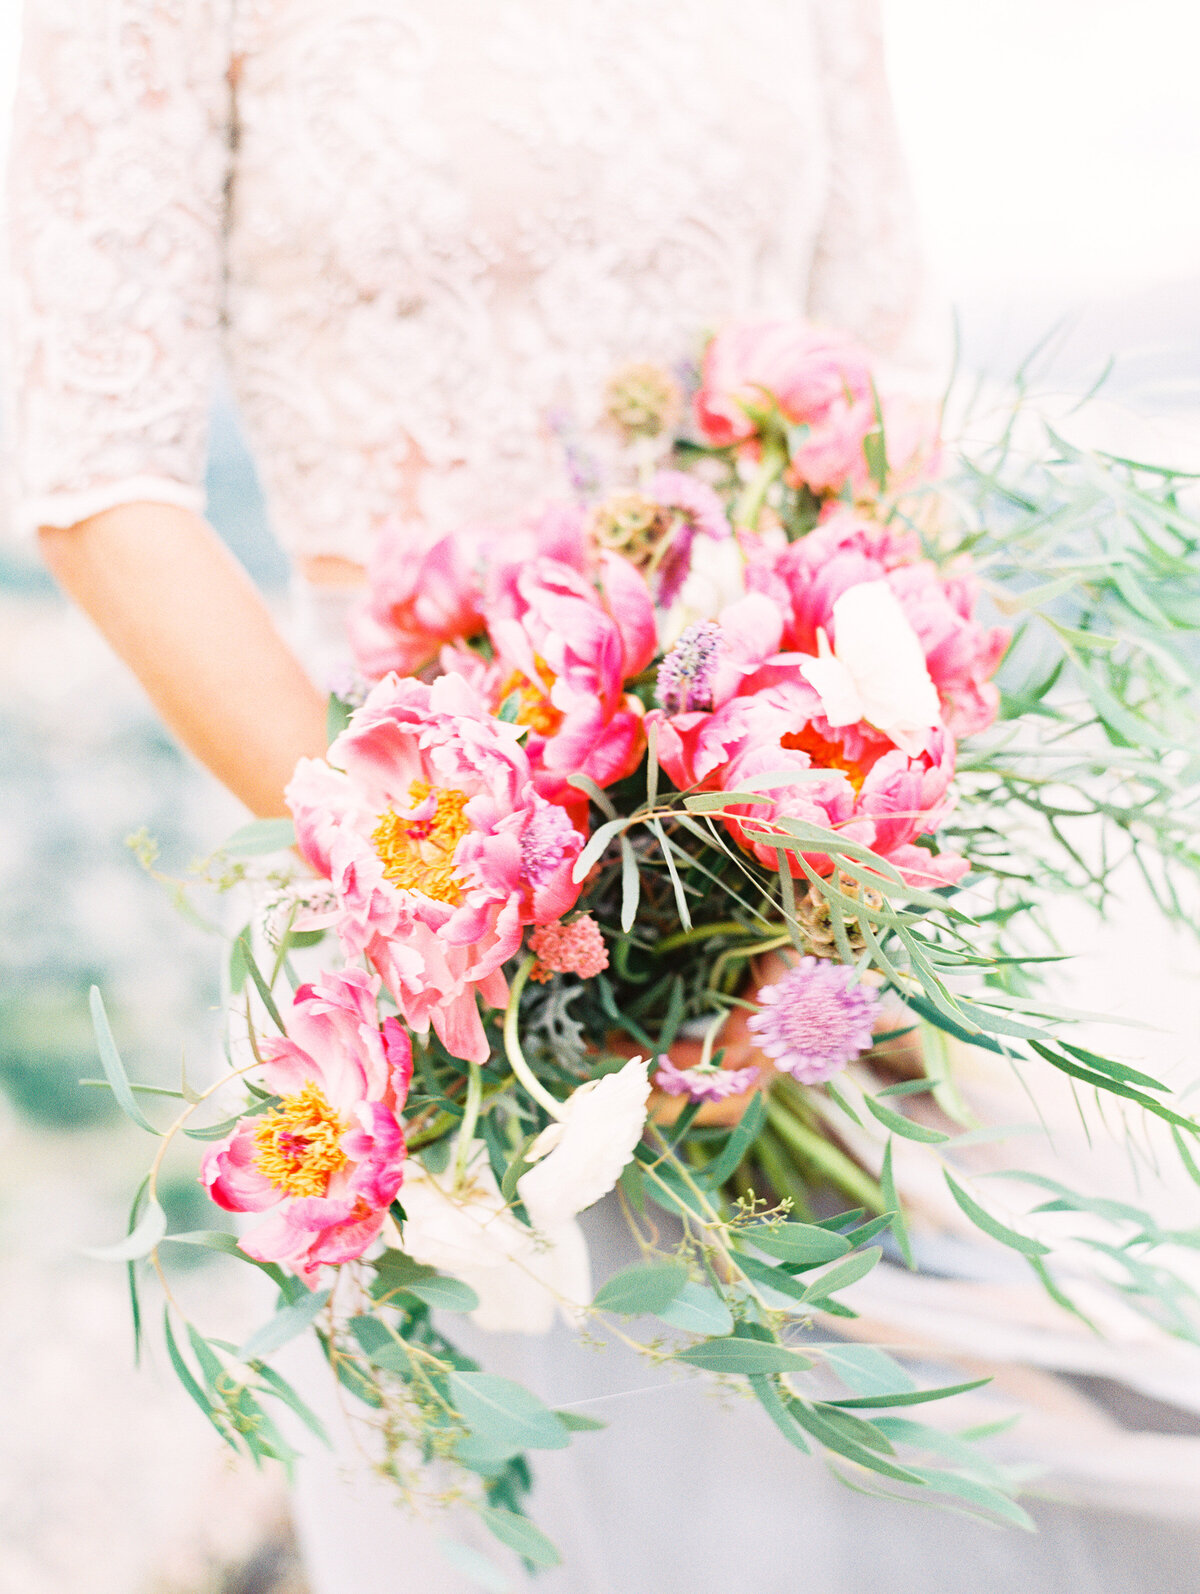 Sunrise Elopement Photos in Leanne Marshall-26